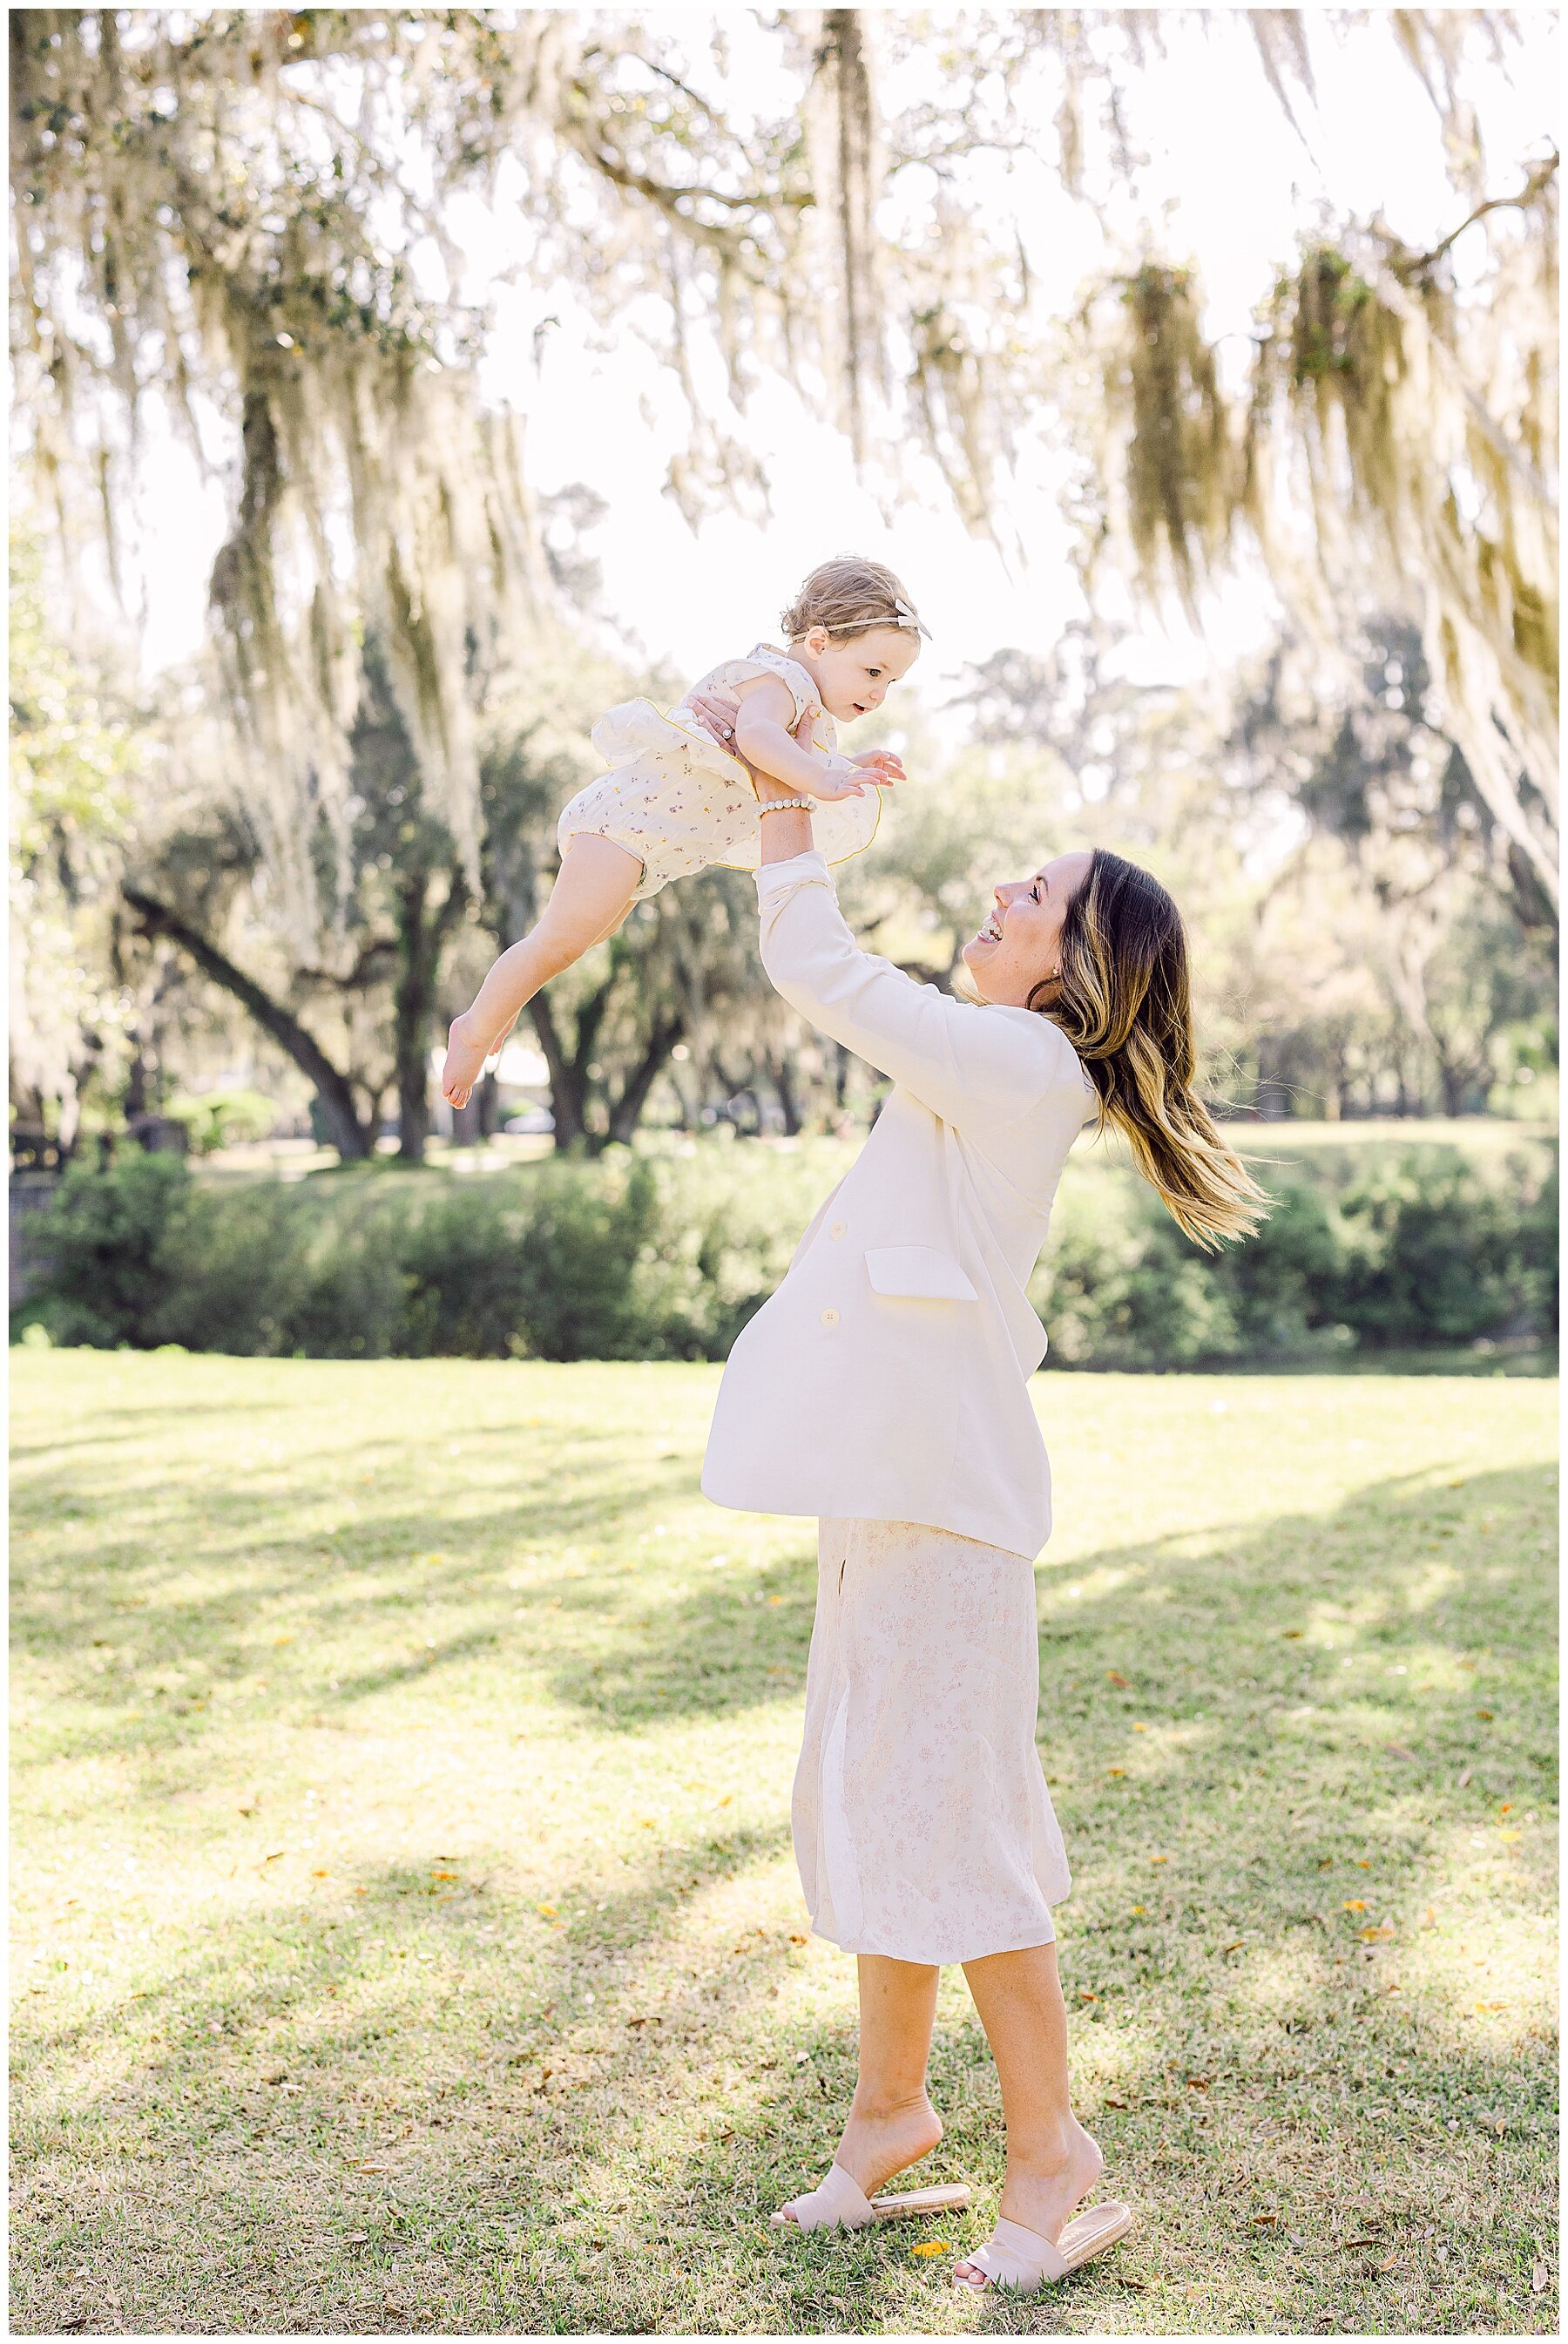 Katherine_Ives_Photography_Sallah_Palmetto_Bluff_Family_Session_24.JPG